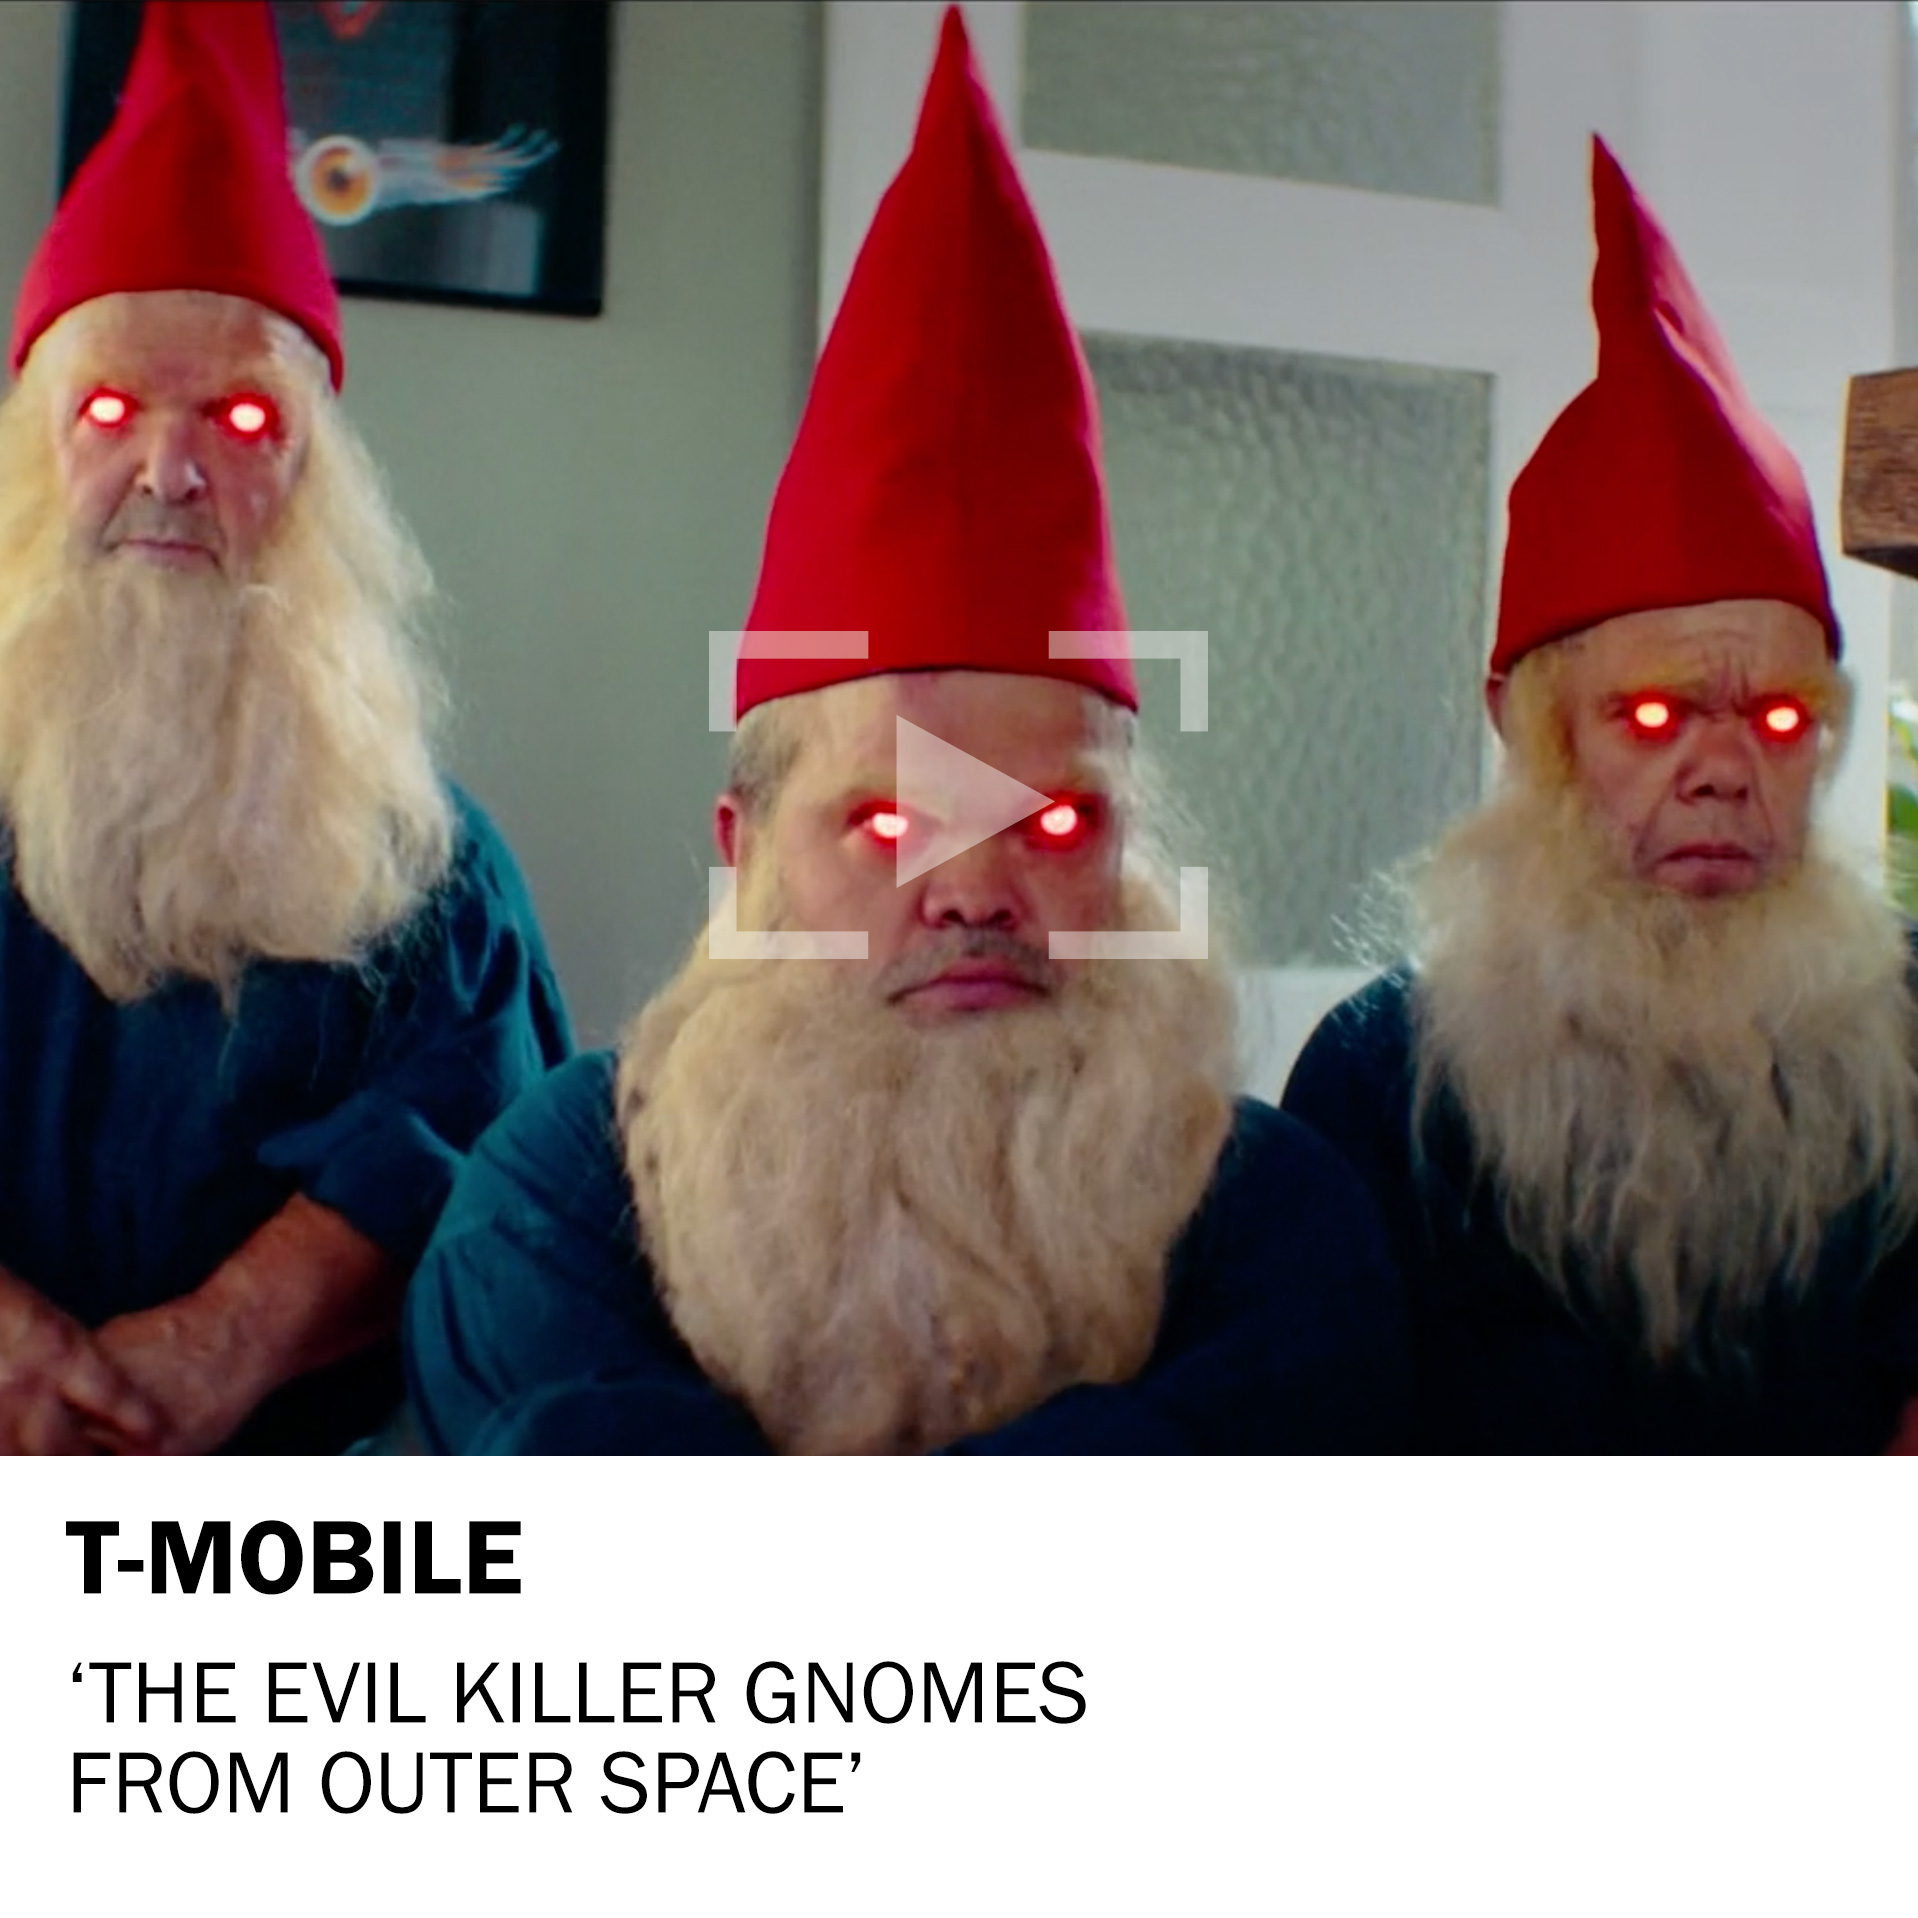 T-Mobile – The Evil Killer Gnomes from Outer Space